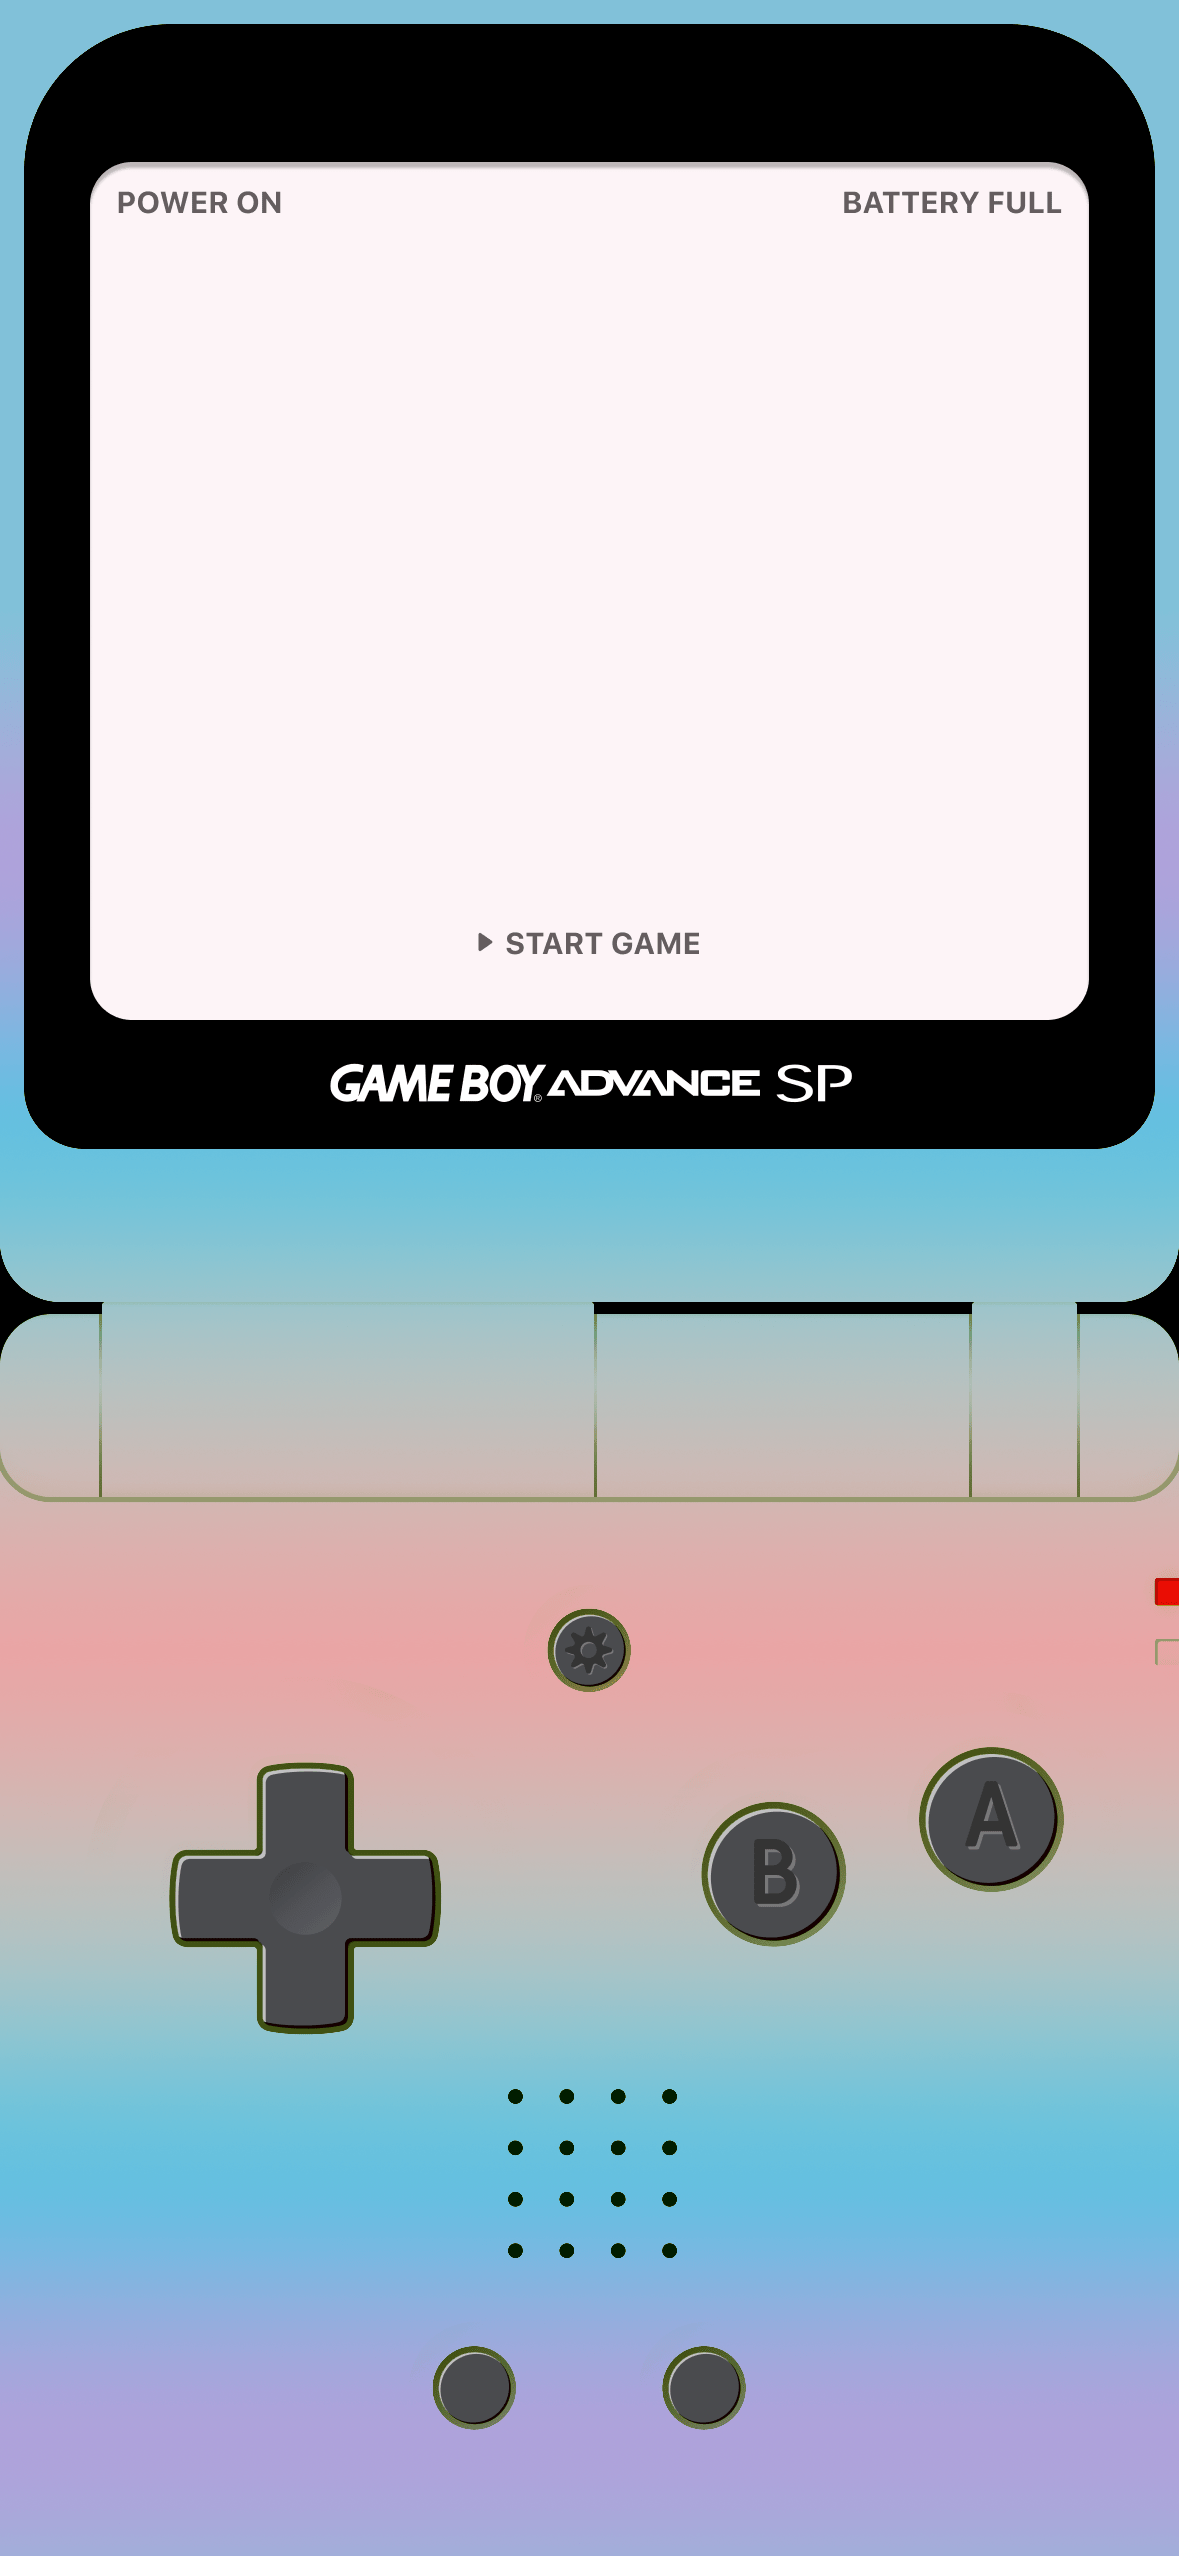 A mockup of a Game Boy Advance menu, with a power on battery full screen and a start game button. - Game Boy